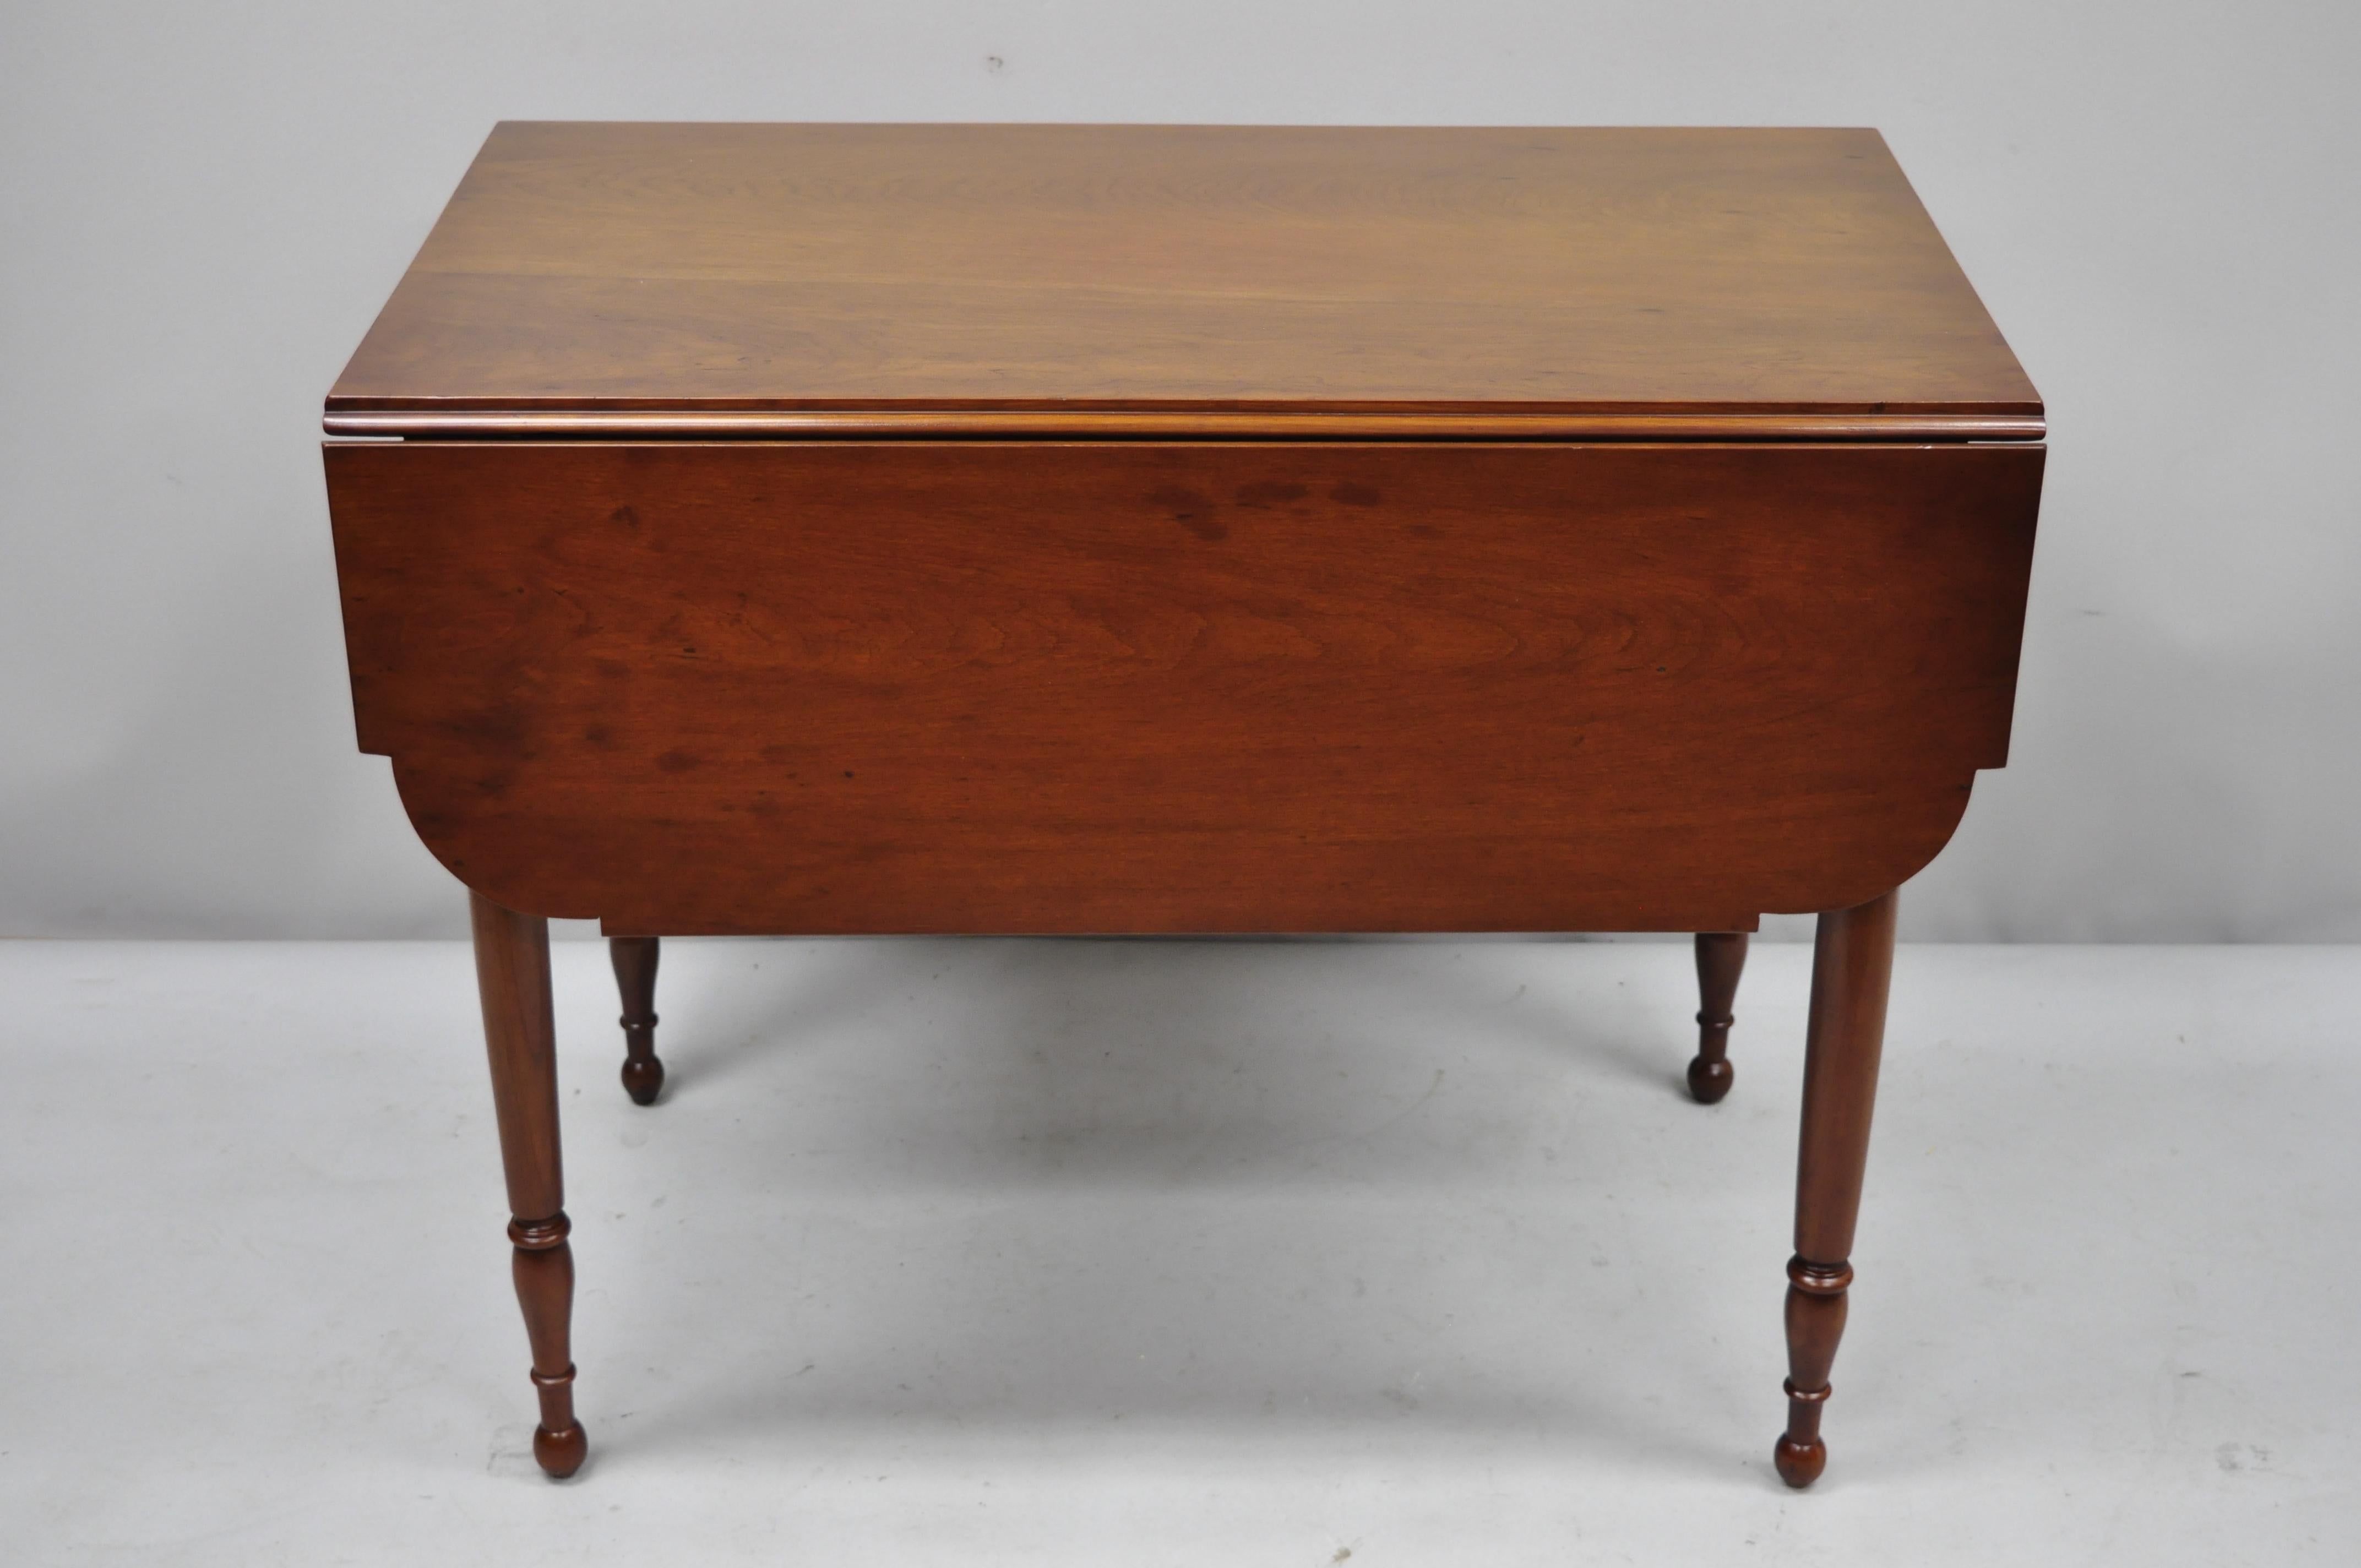 19th Century Antique Cherry Wood American Colonial Drop Leaf Pembroke Table For Sale 4